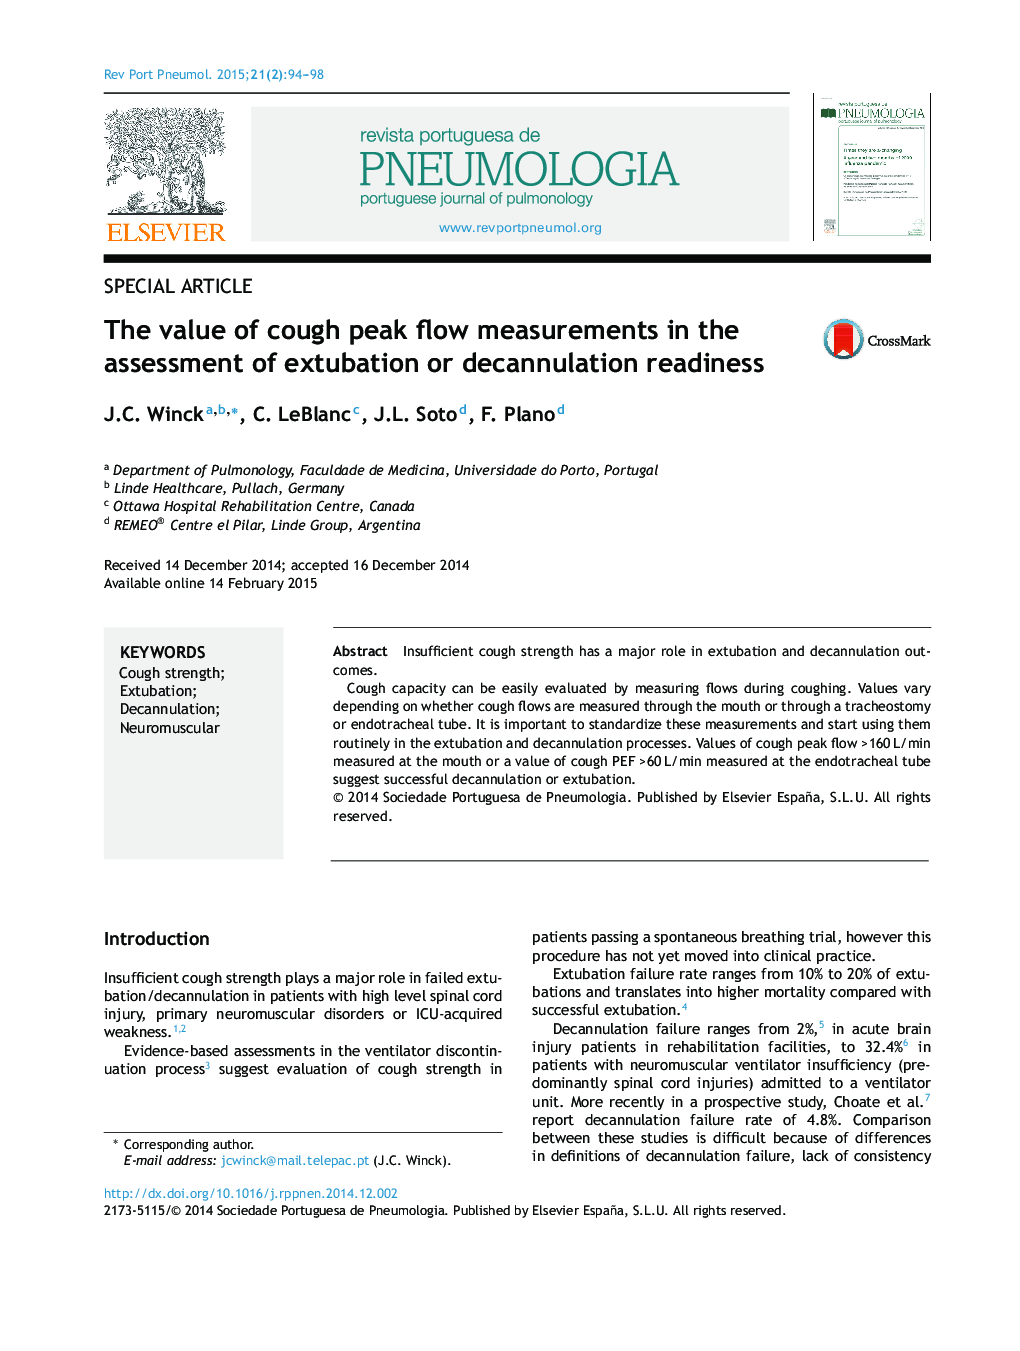 The value of cough peak flow measurements in the assessment of extubation or decannulation readiness